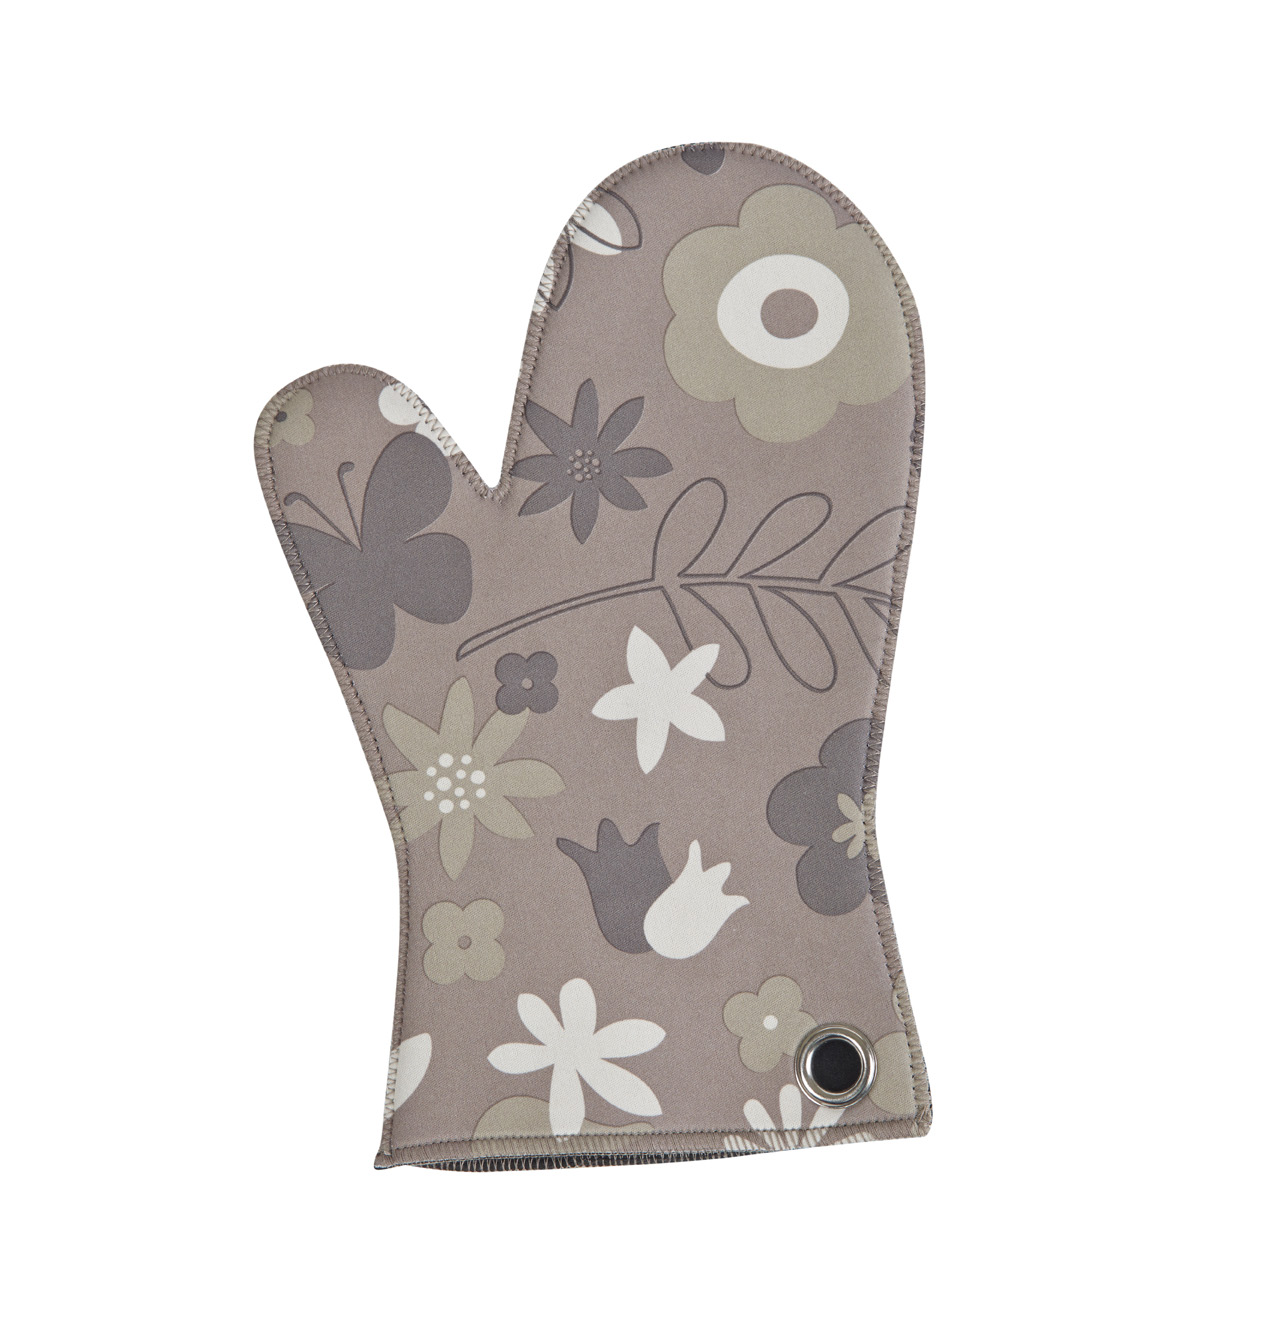 Ovenwant floral CC neoprene  28.5x18.5cm, taupe